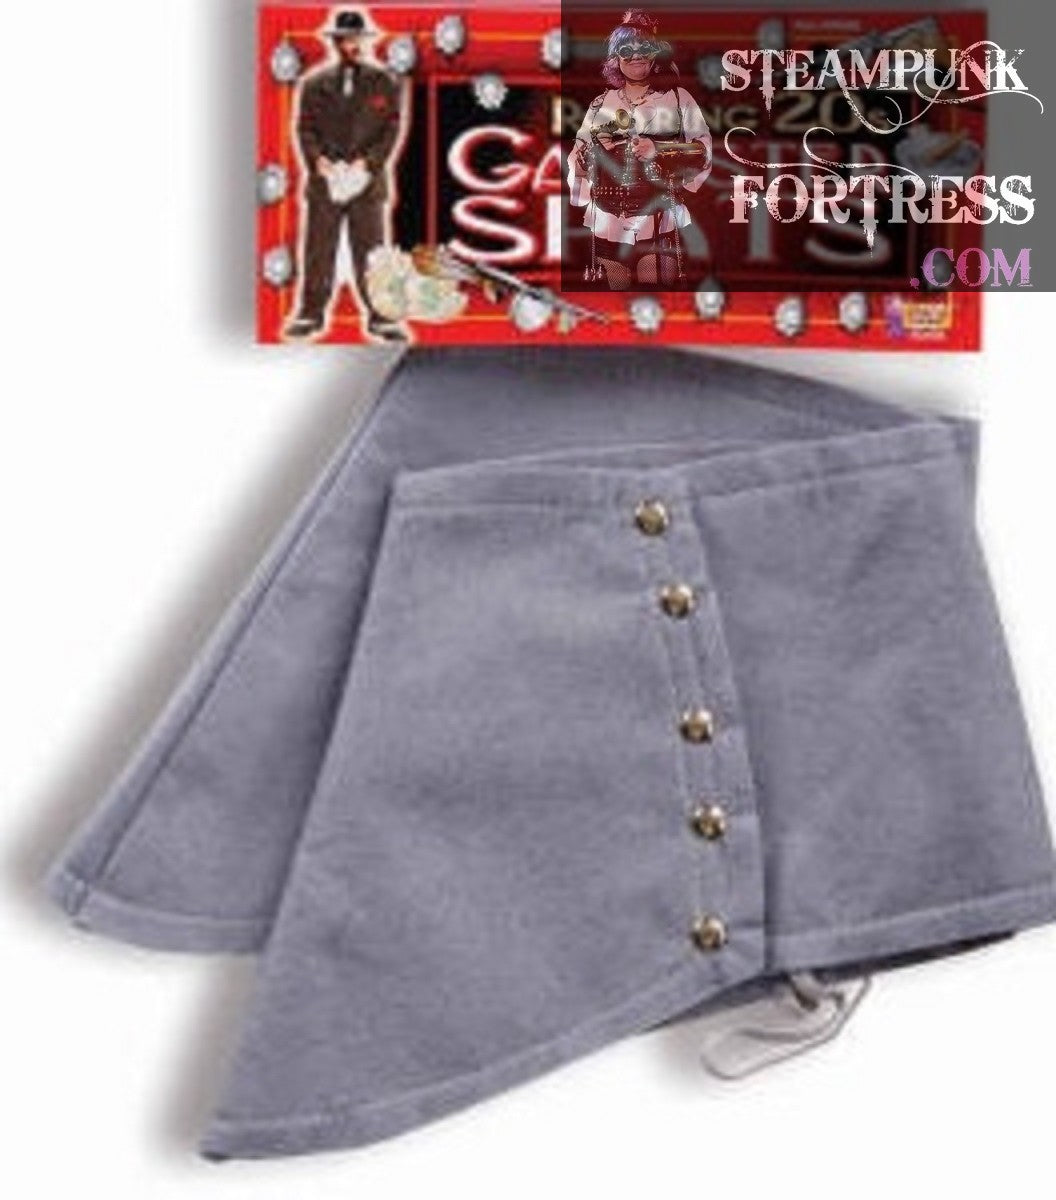 GREY GRAY BLUE STEAMPUNK SPATS SILVER STUDS SPATTERDASHES SPATTER GUARD SHOE COVERINGS COSPLAY COSTUME HALLOWEEN GANGSTER STEAMPUNK FORTRESS - MASS PRODUCED